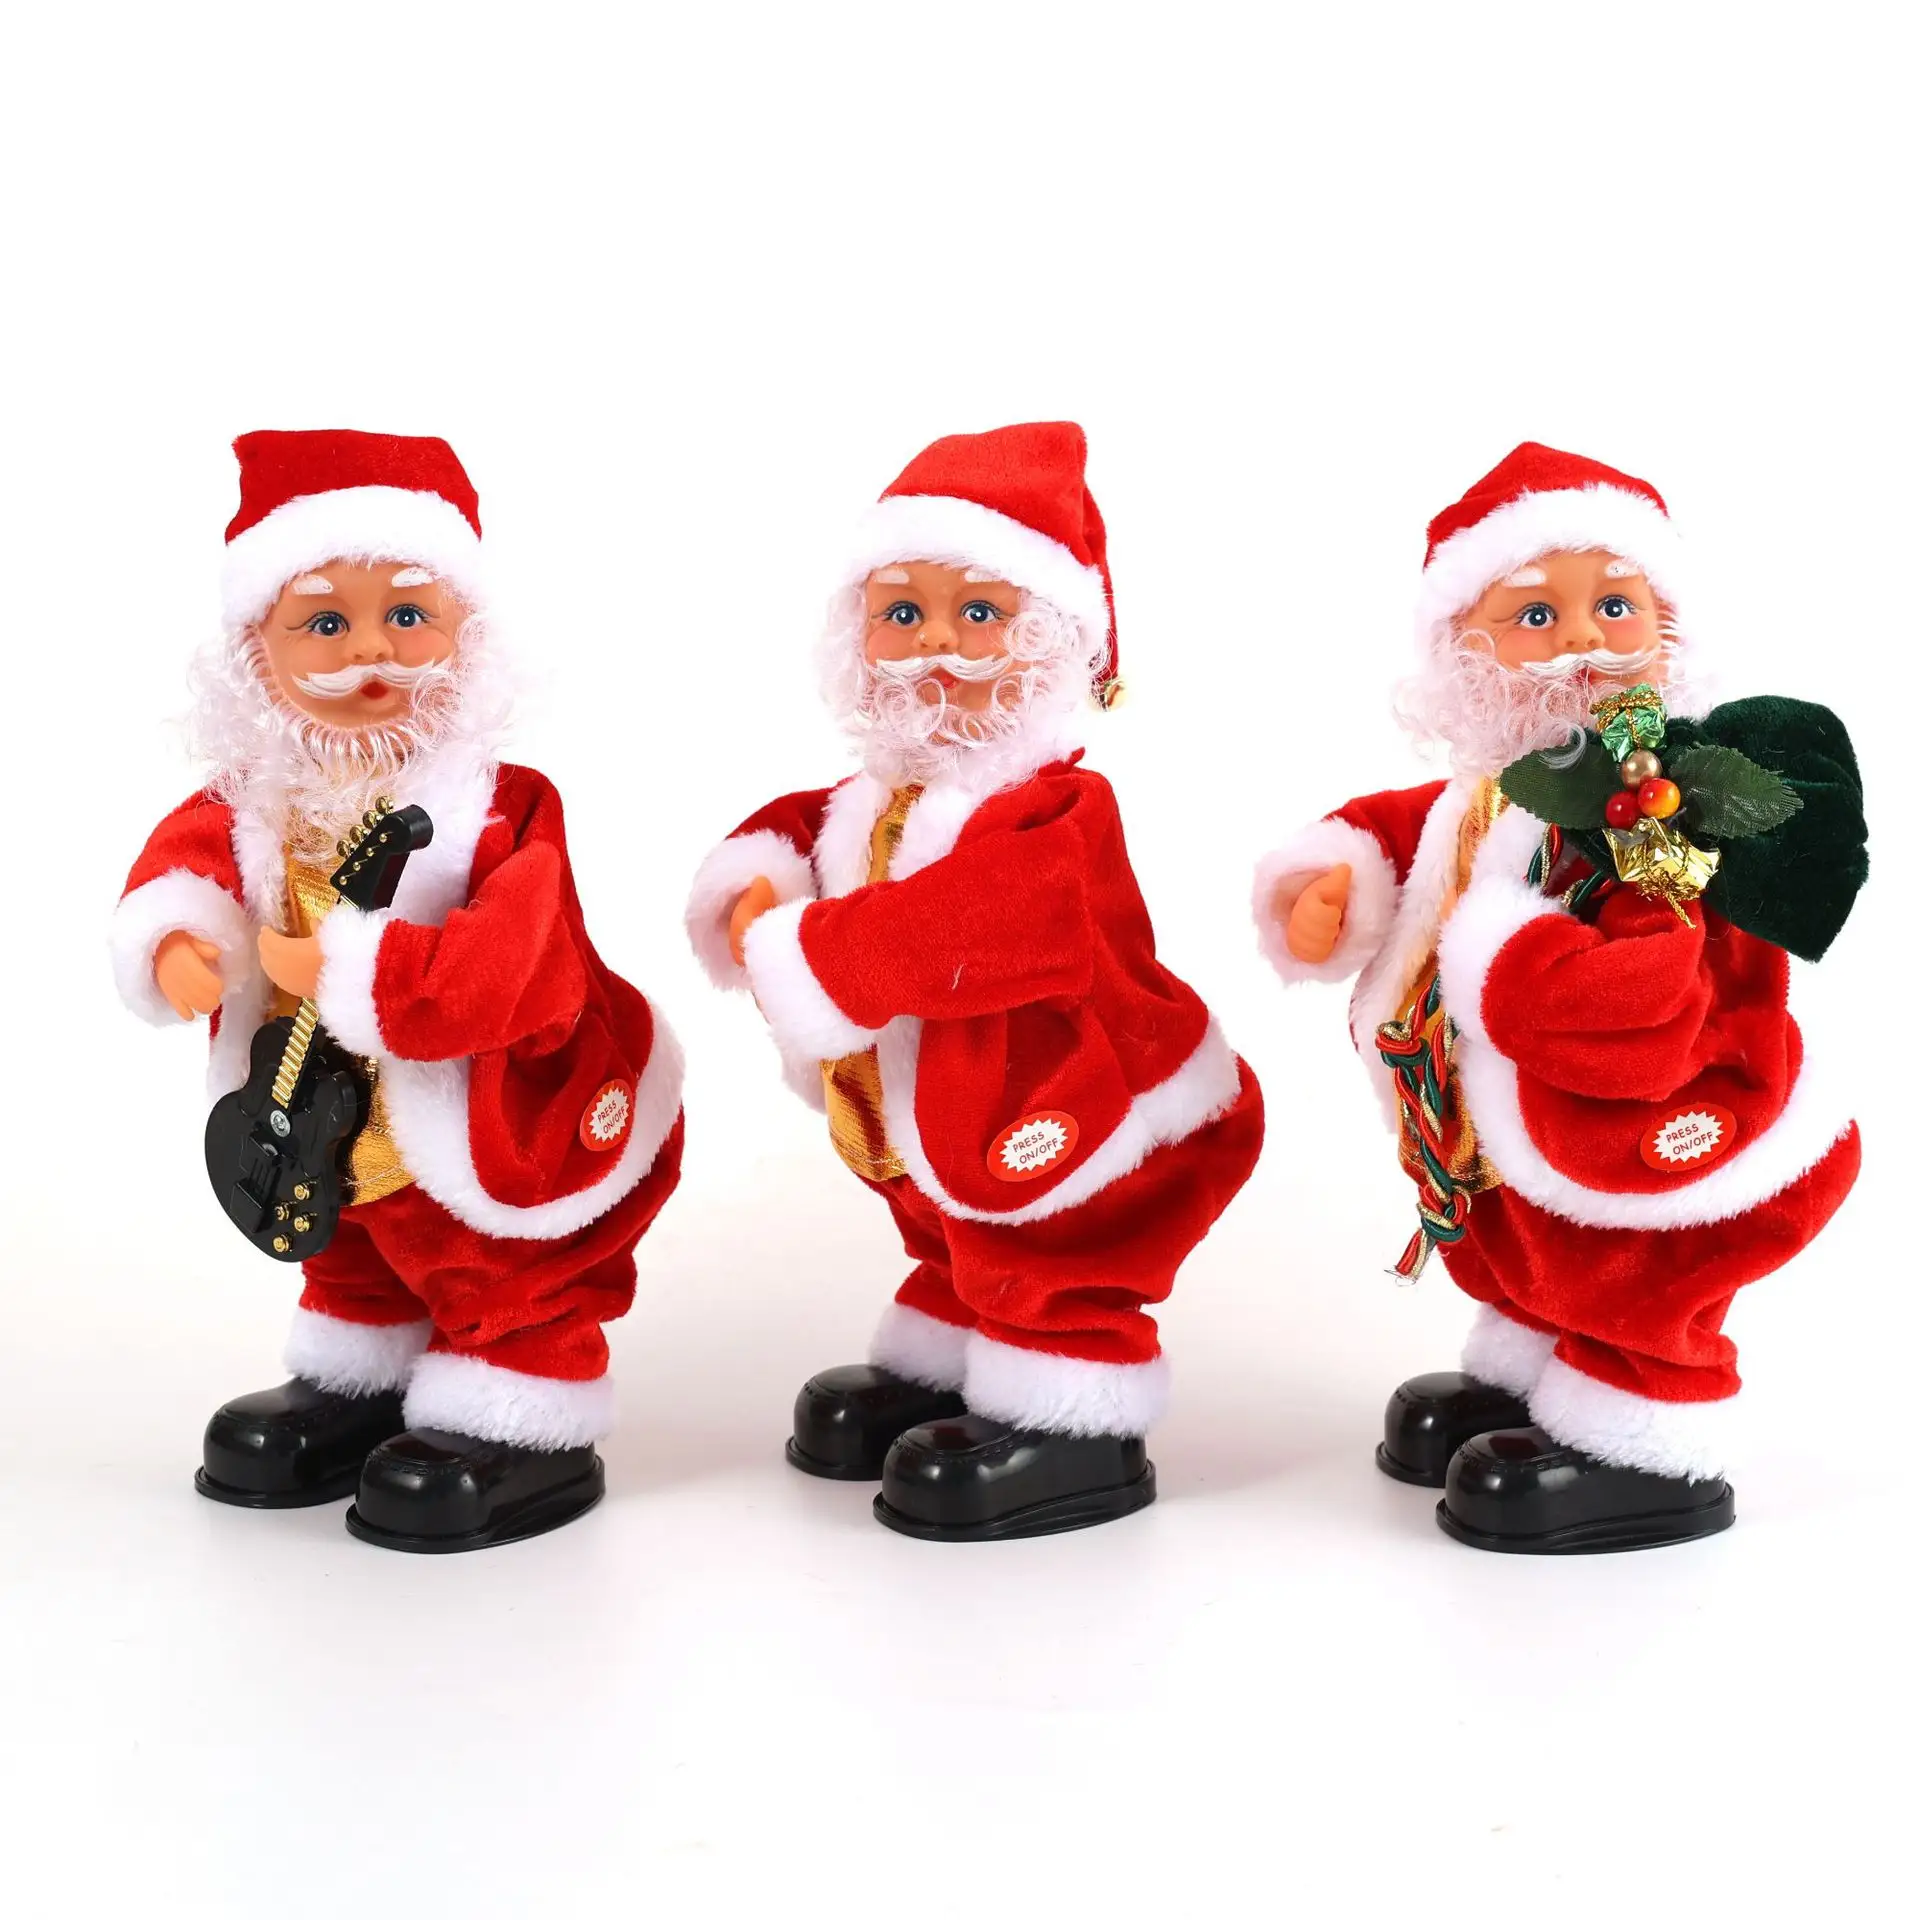 New 2022 Christmas Gift Electric Musical Dancing Santa Claus Doll Party Christmas Decoration Kids Gifts Ornaments